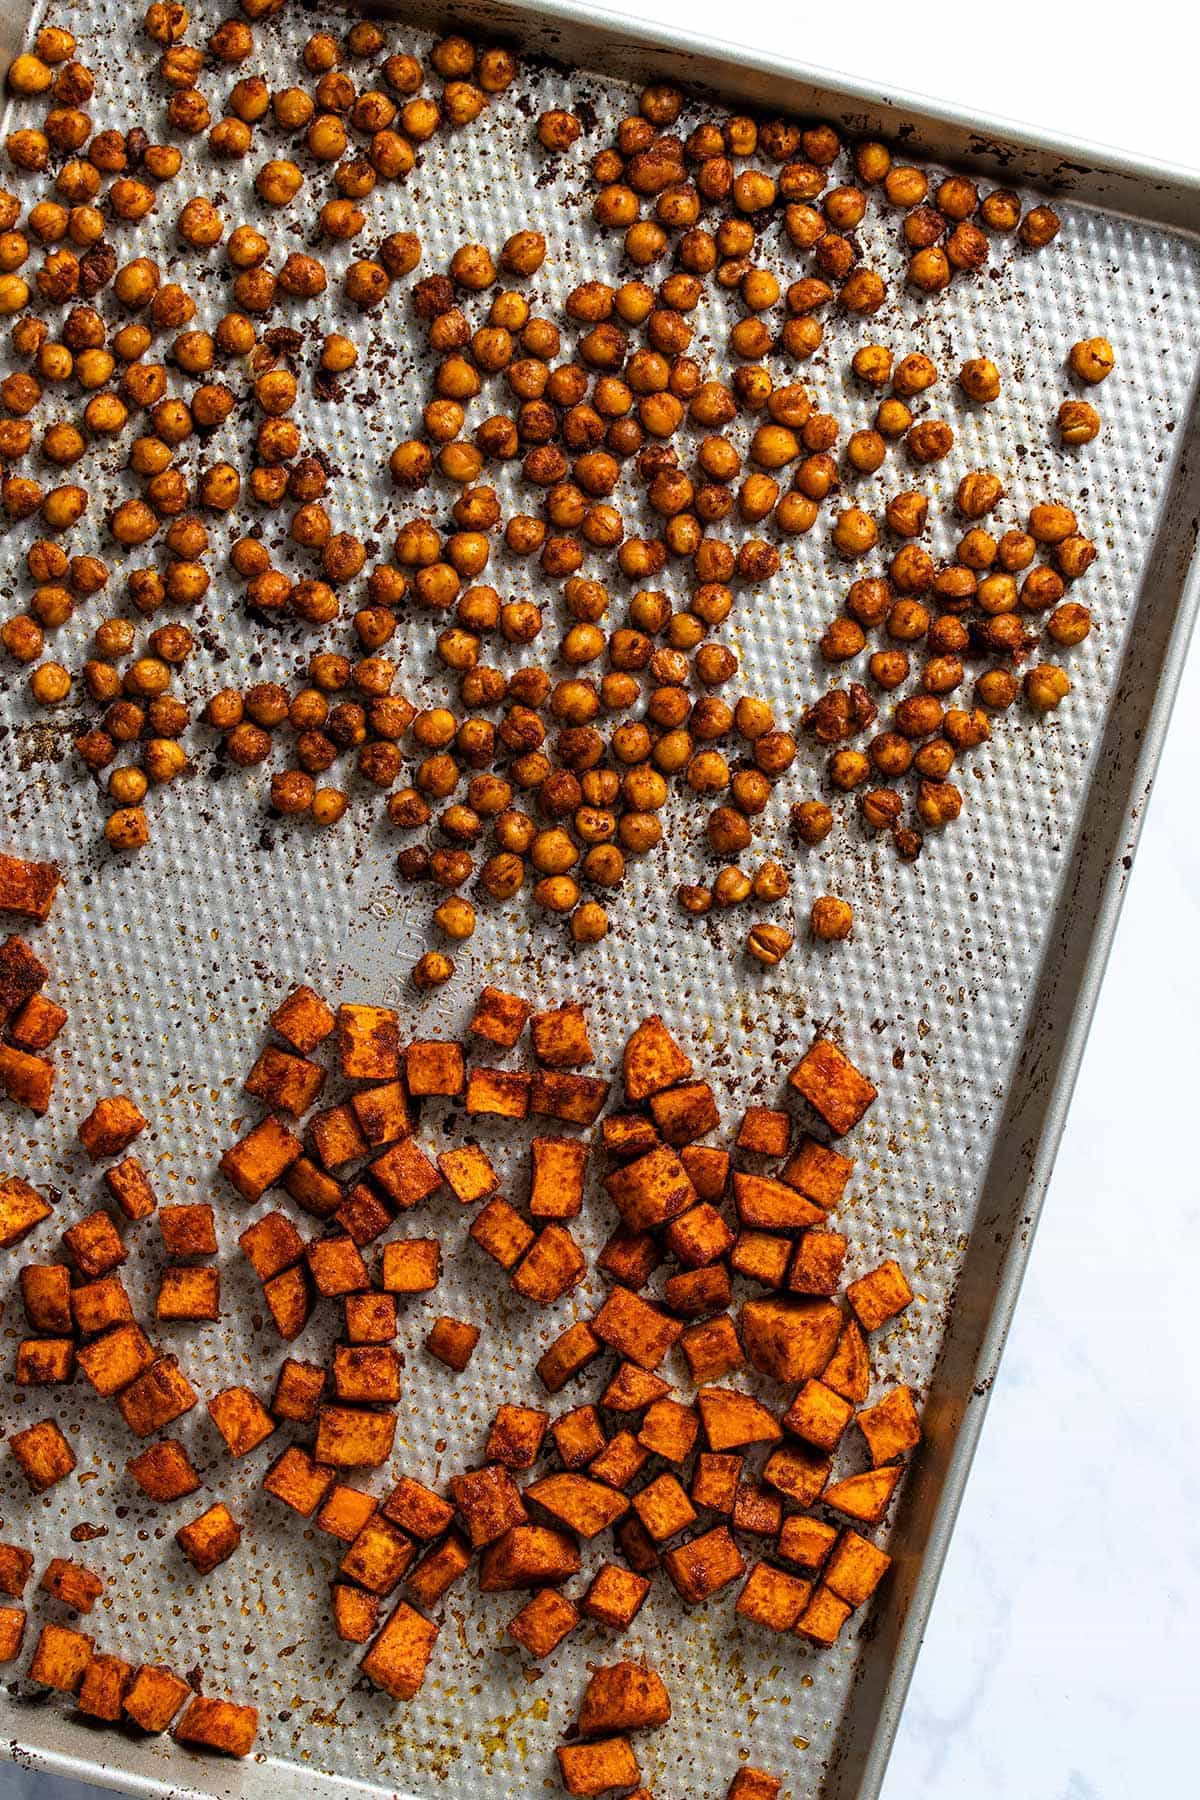 roasted chickpeas and diced sweet potato covered in moroccan spices on a silver sheet pan